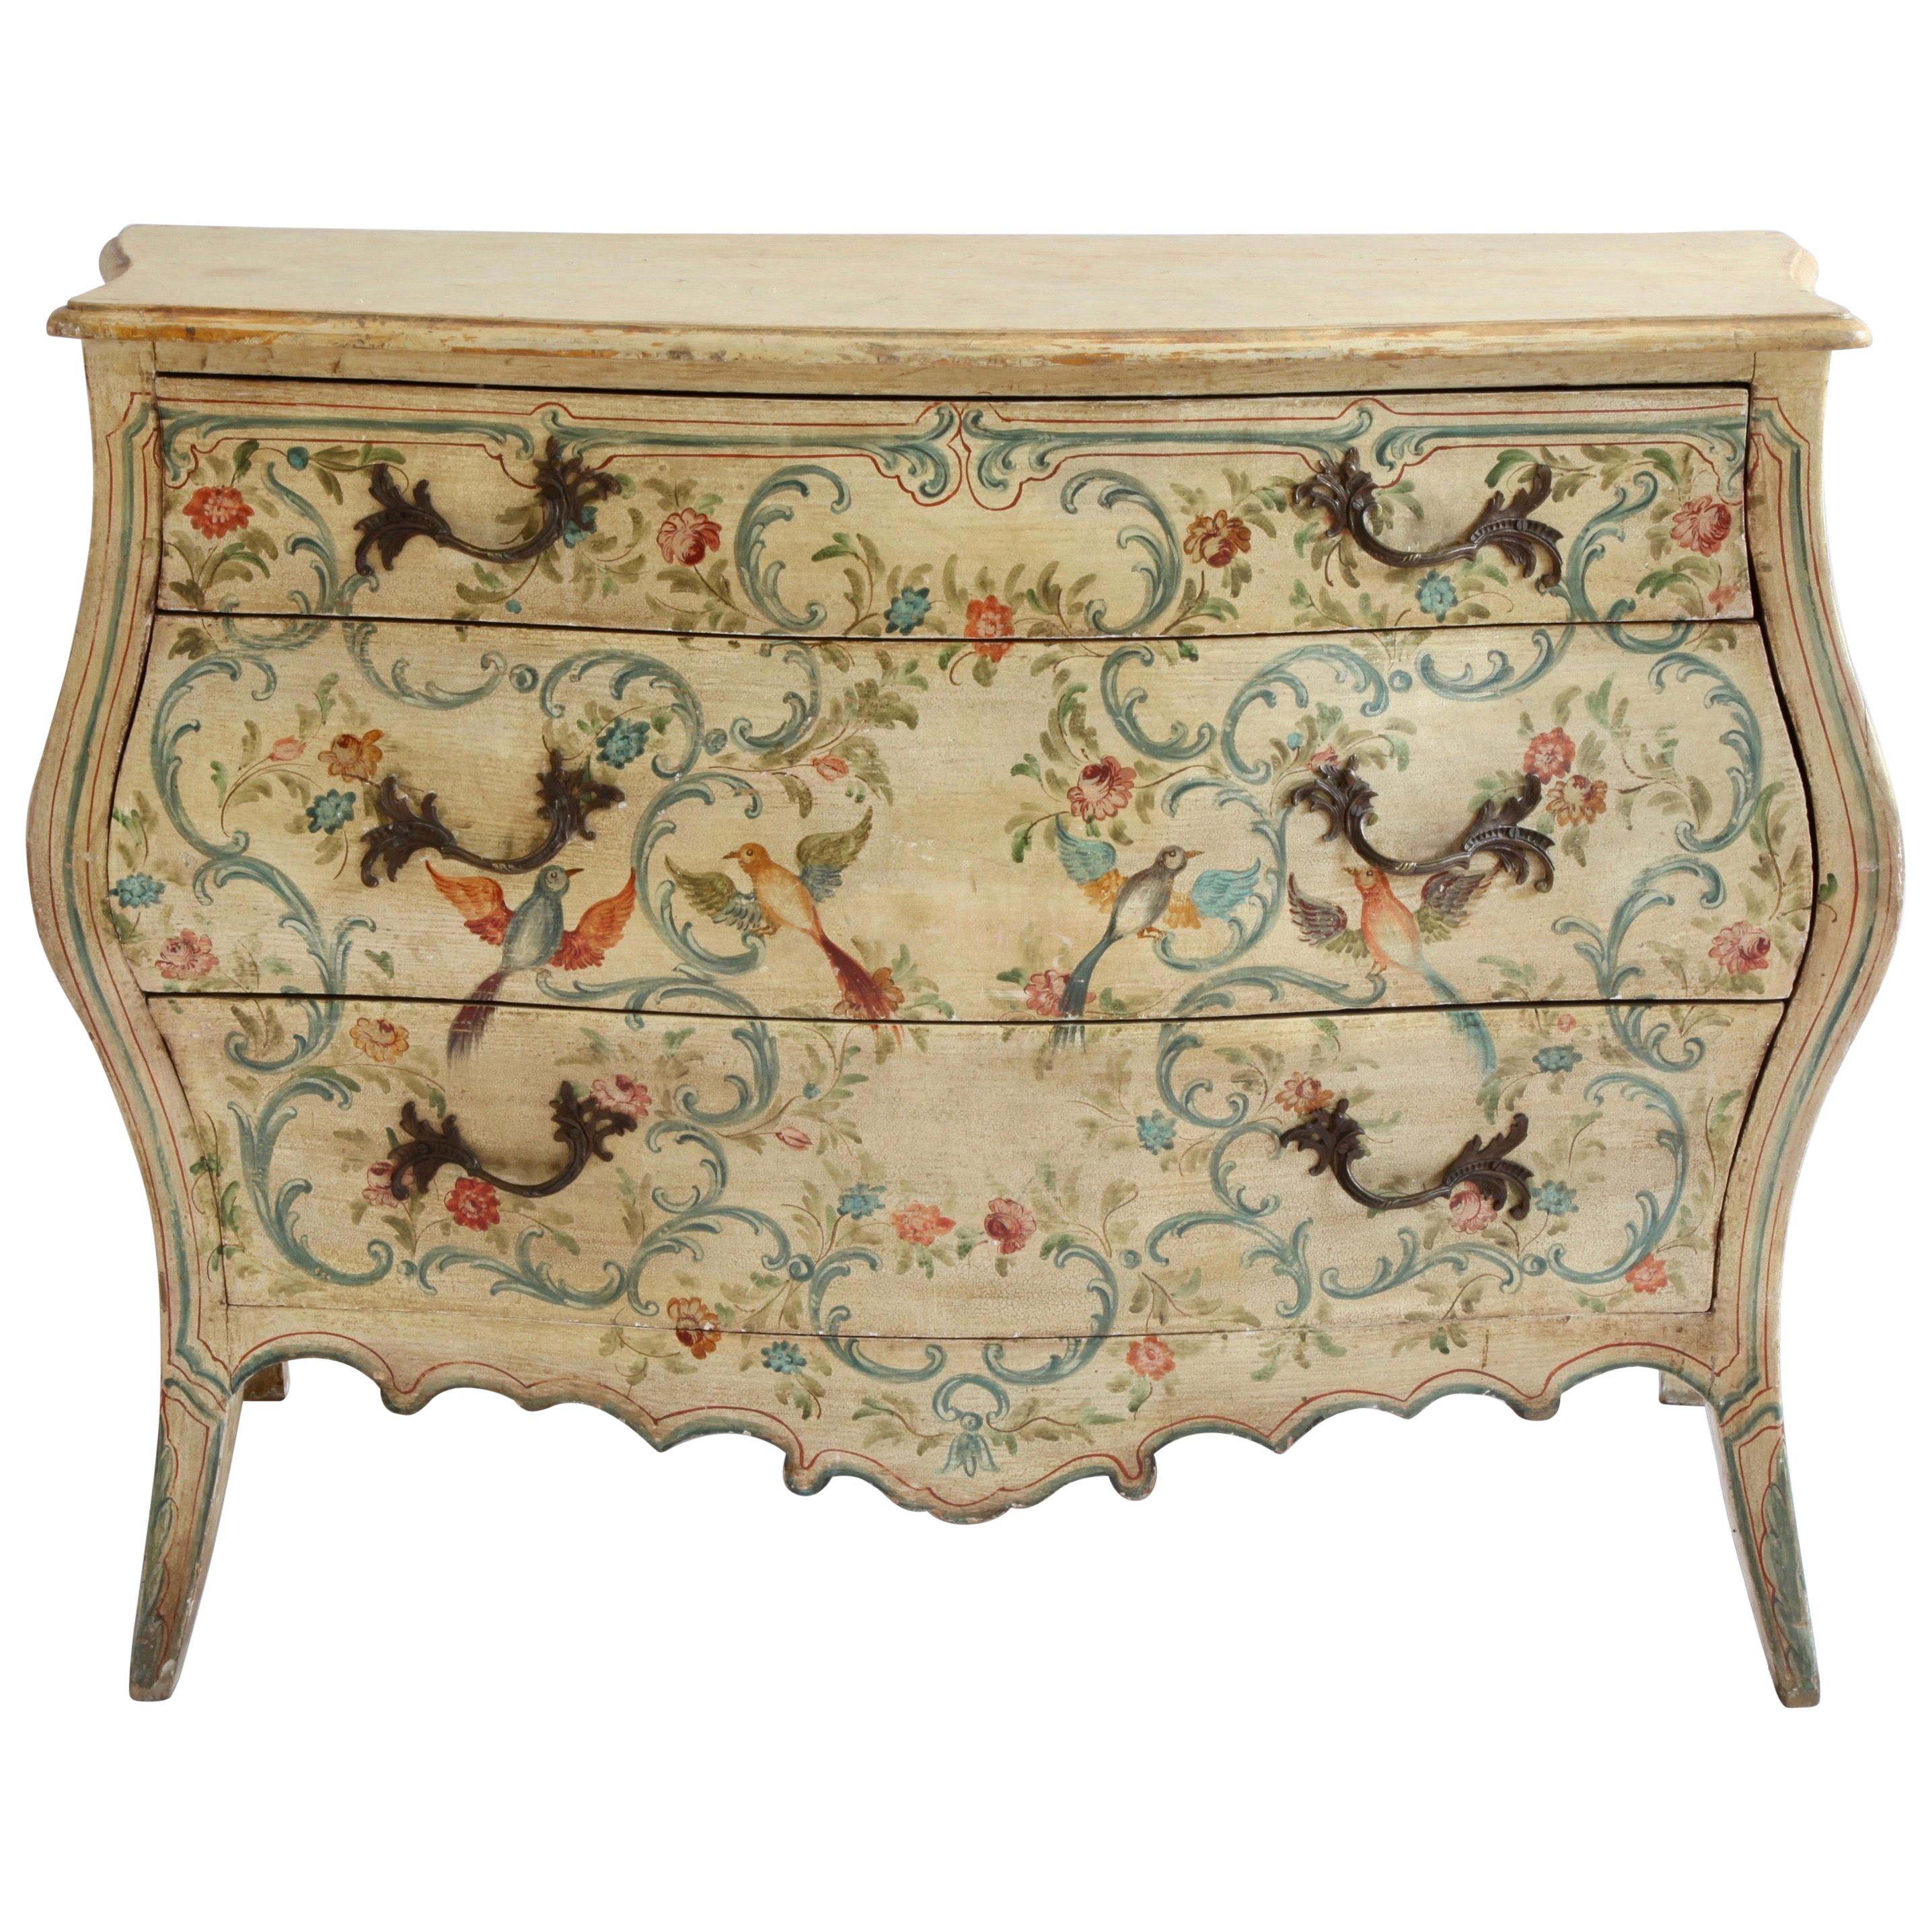 19th Century Louis XV Style Venetian Painted Bombe Chest Of Drawers